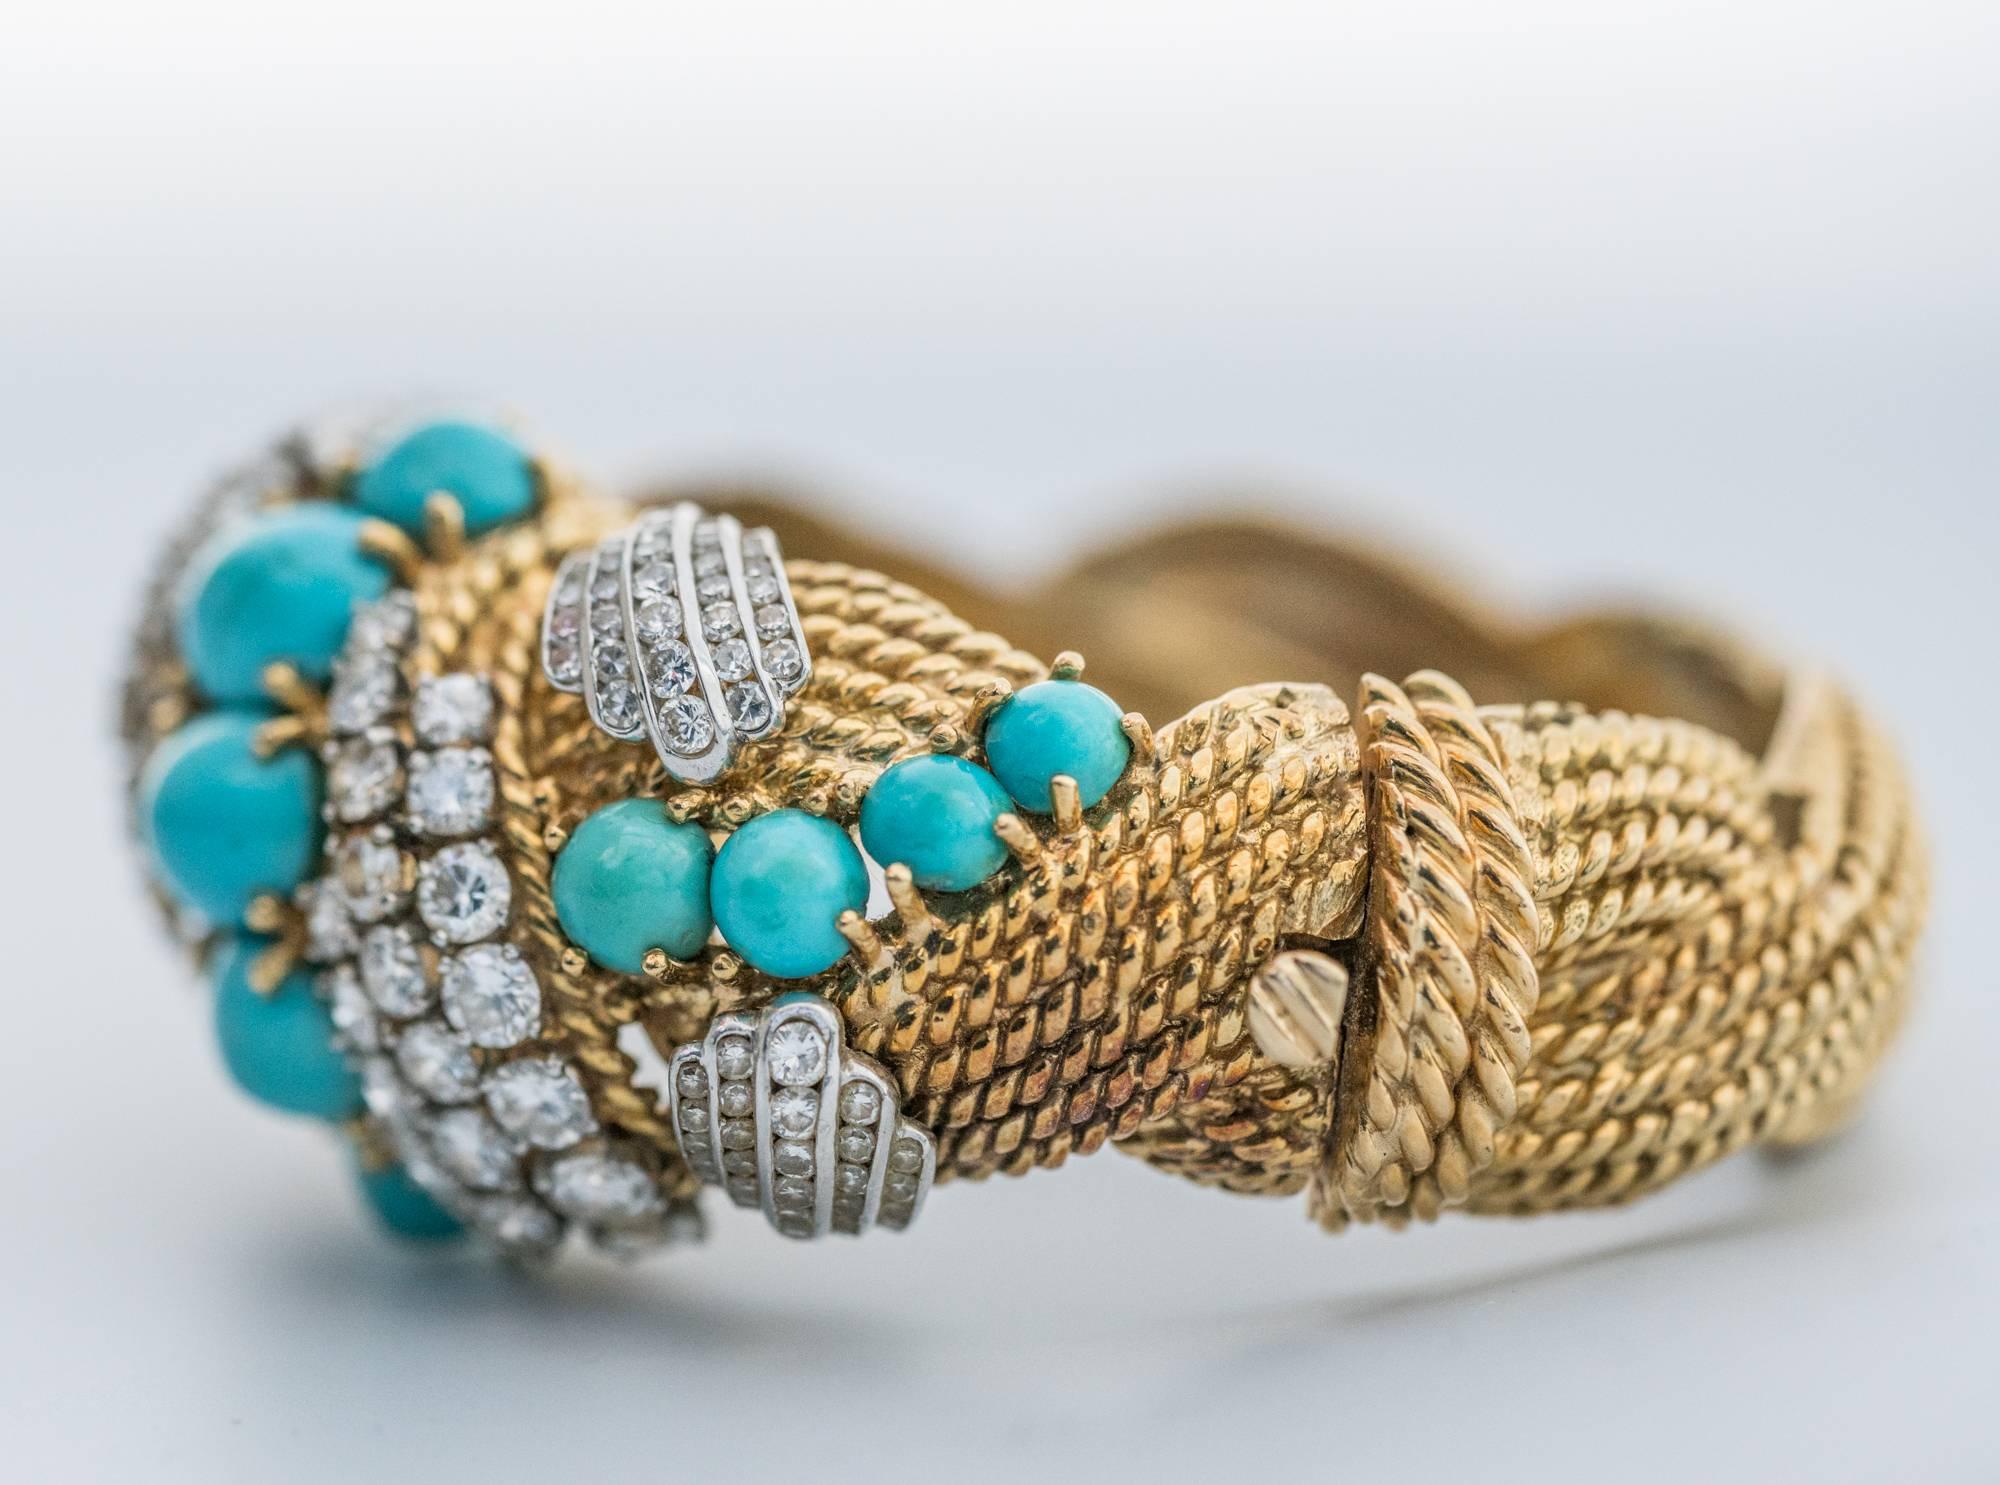 Bold statement bangle from the 1950s, perfect Retro example use of Persian Turquoise and Transitional Cut Diamonds. All Diamonds boast G-H in color and VS-SI1 in clarity. The pattern is a weave of braided gold strands weighing in at 117.9 grams of